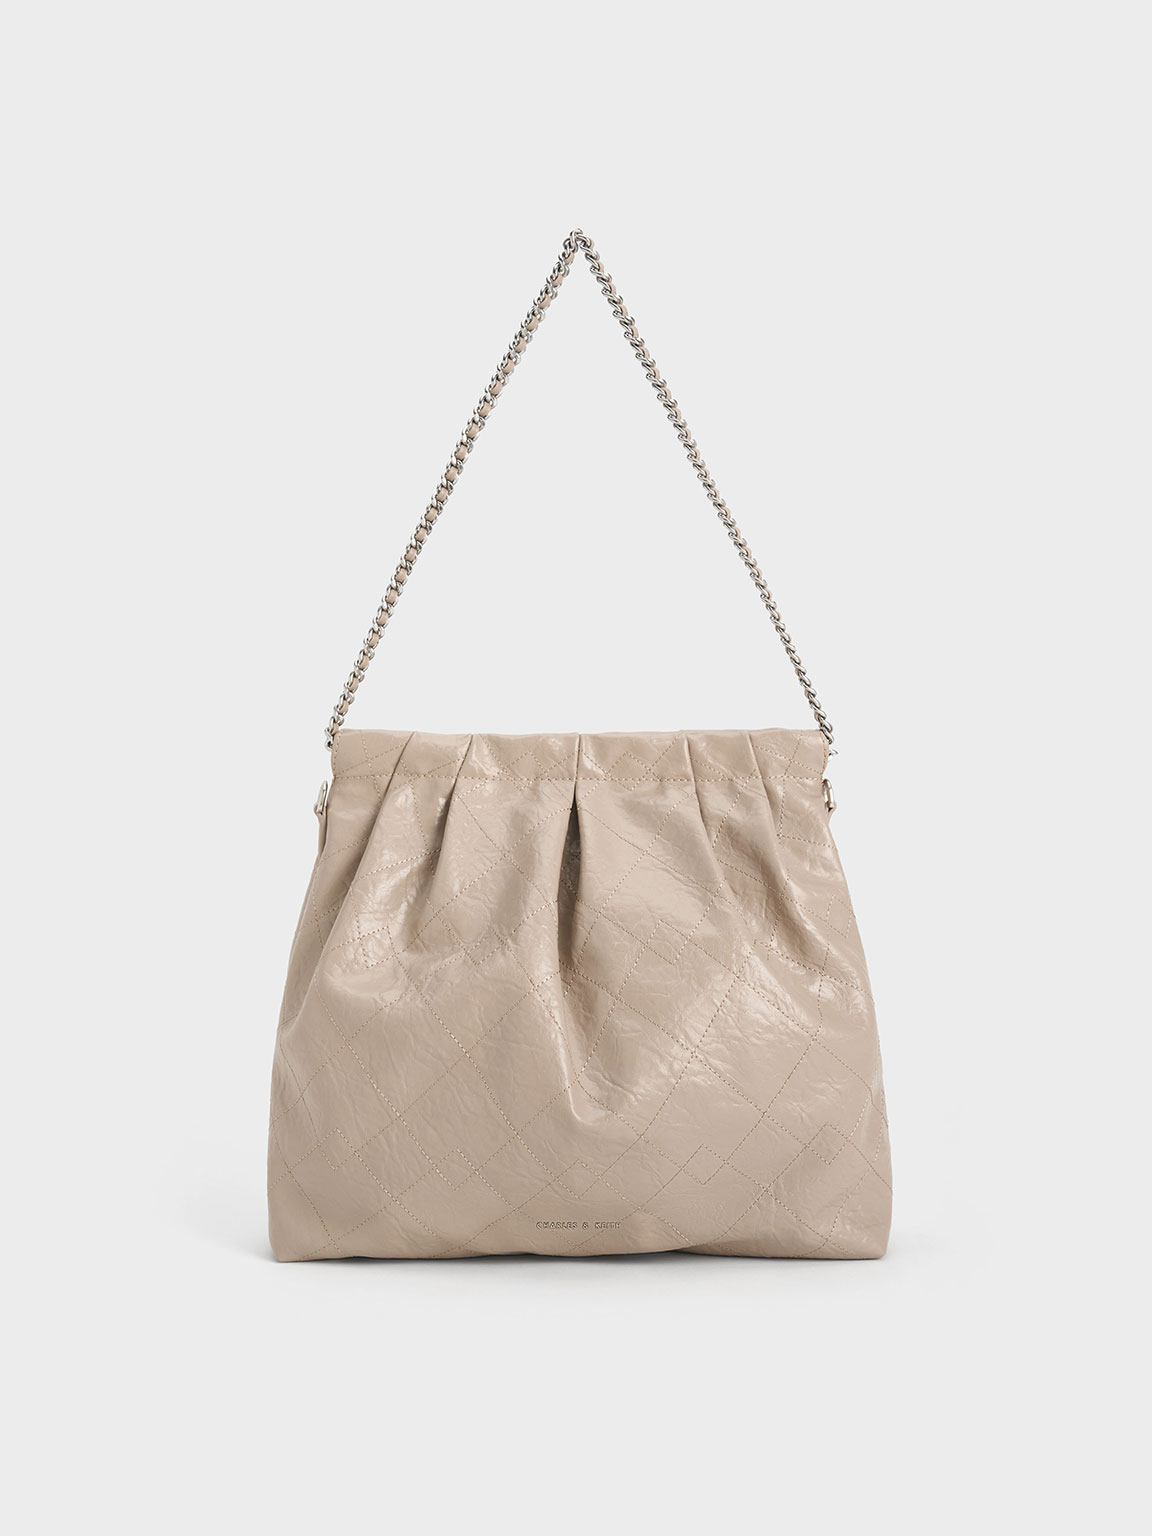 Charles & Keith - Women's Duo Double Chain Hobo Bag, Taupe, L